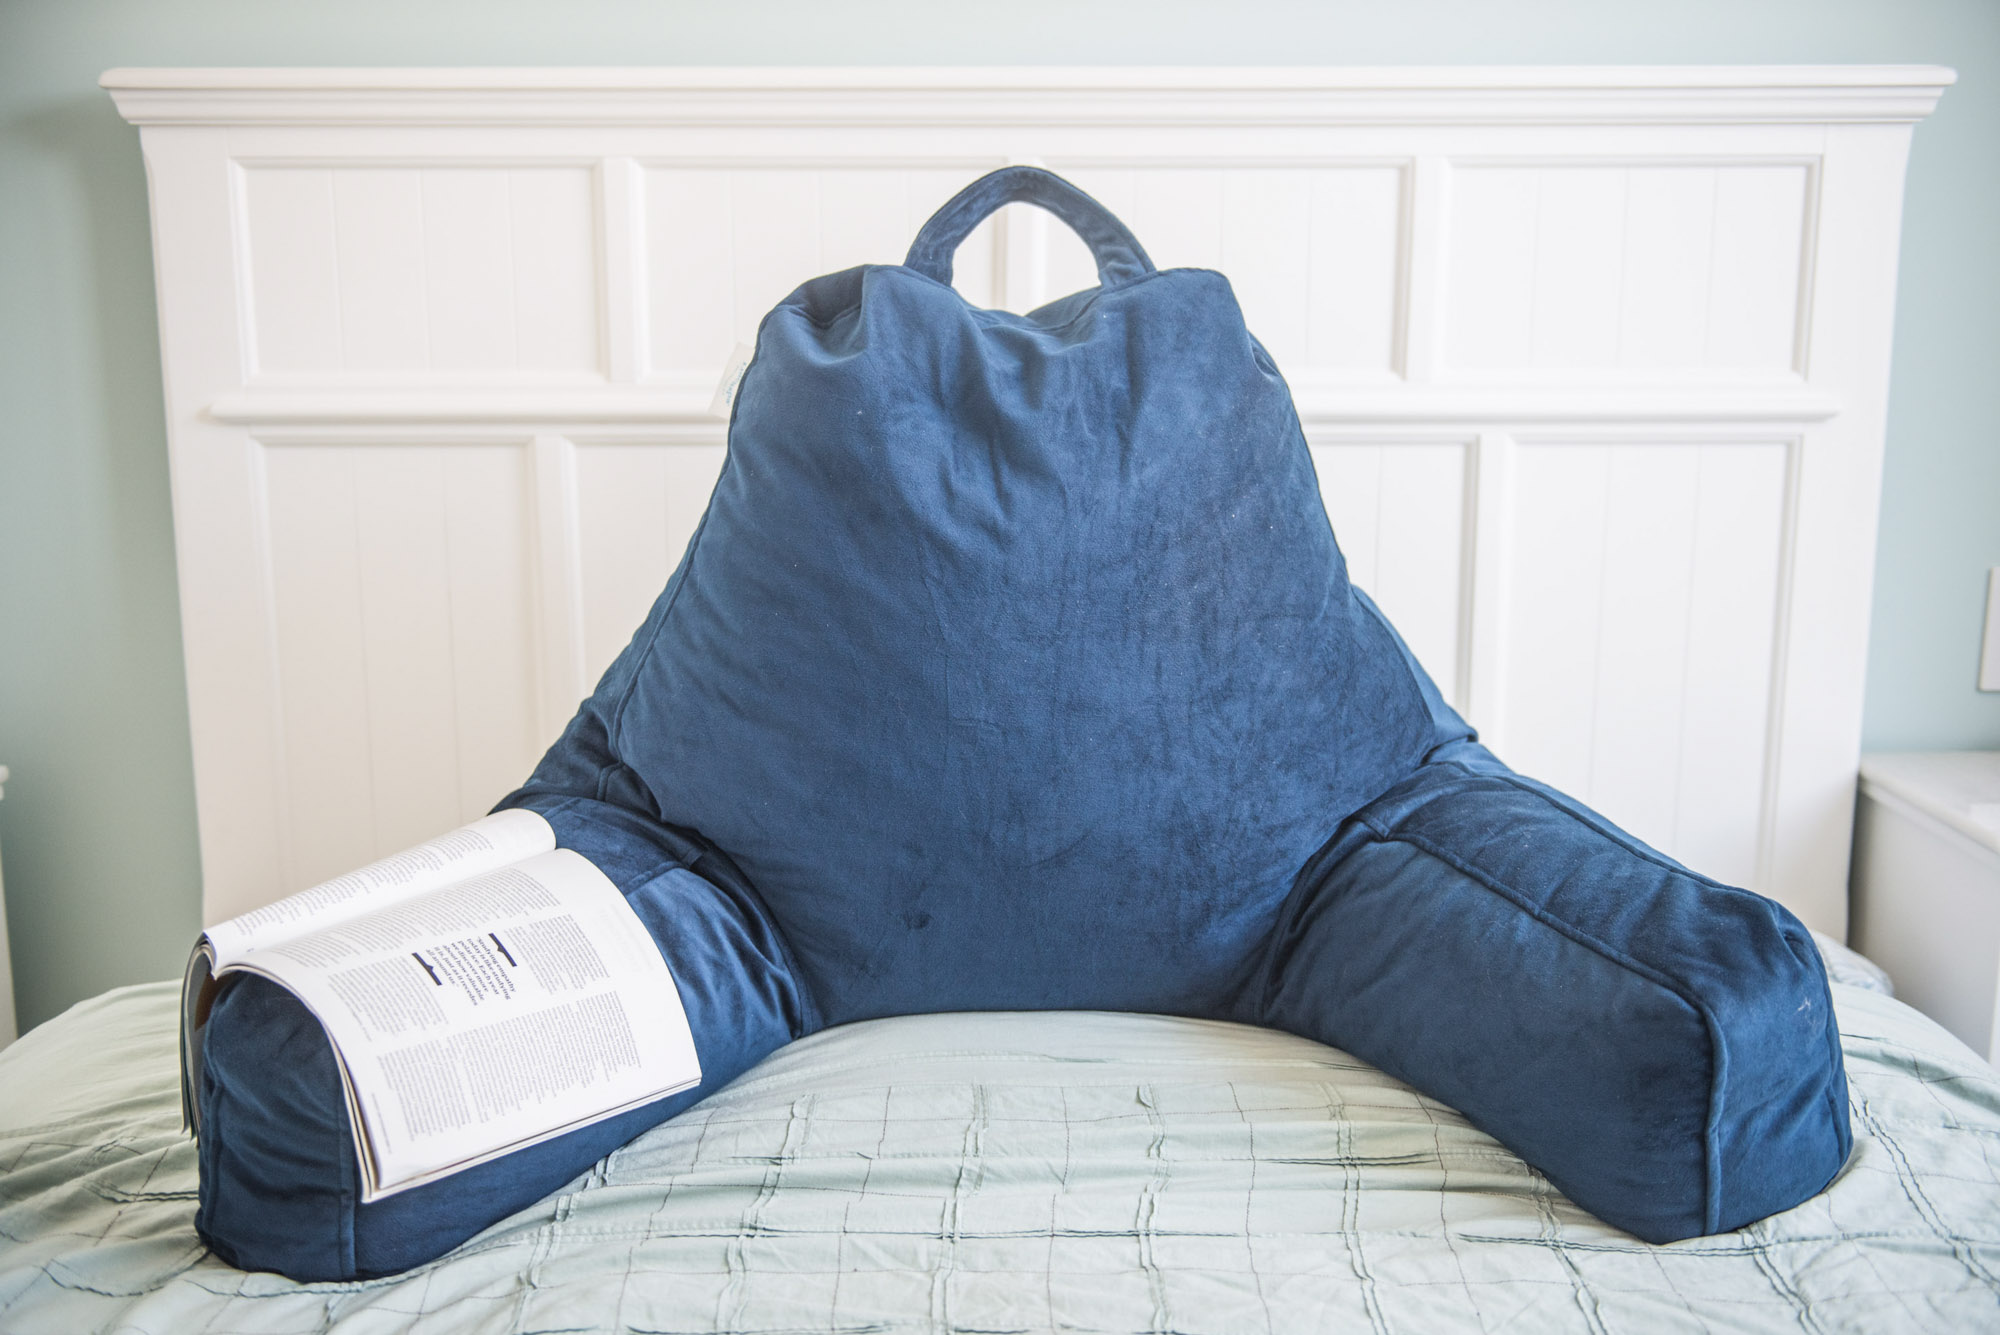 12 Best Pillows for Sitting Up in Bed, According to Experts